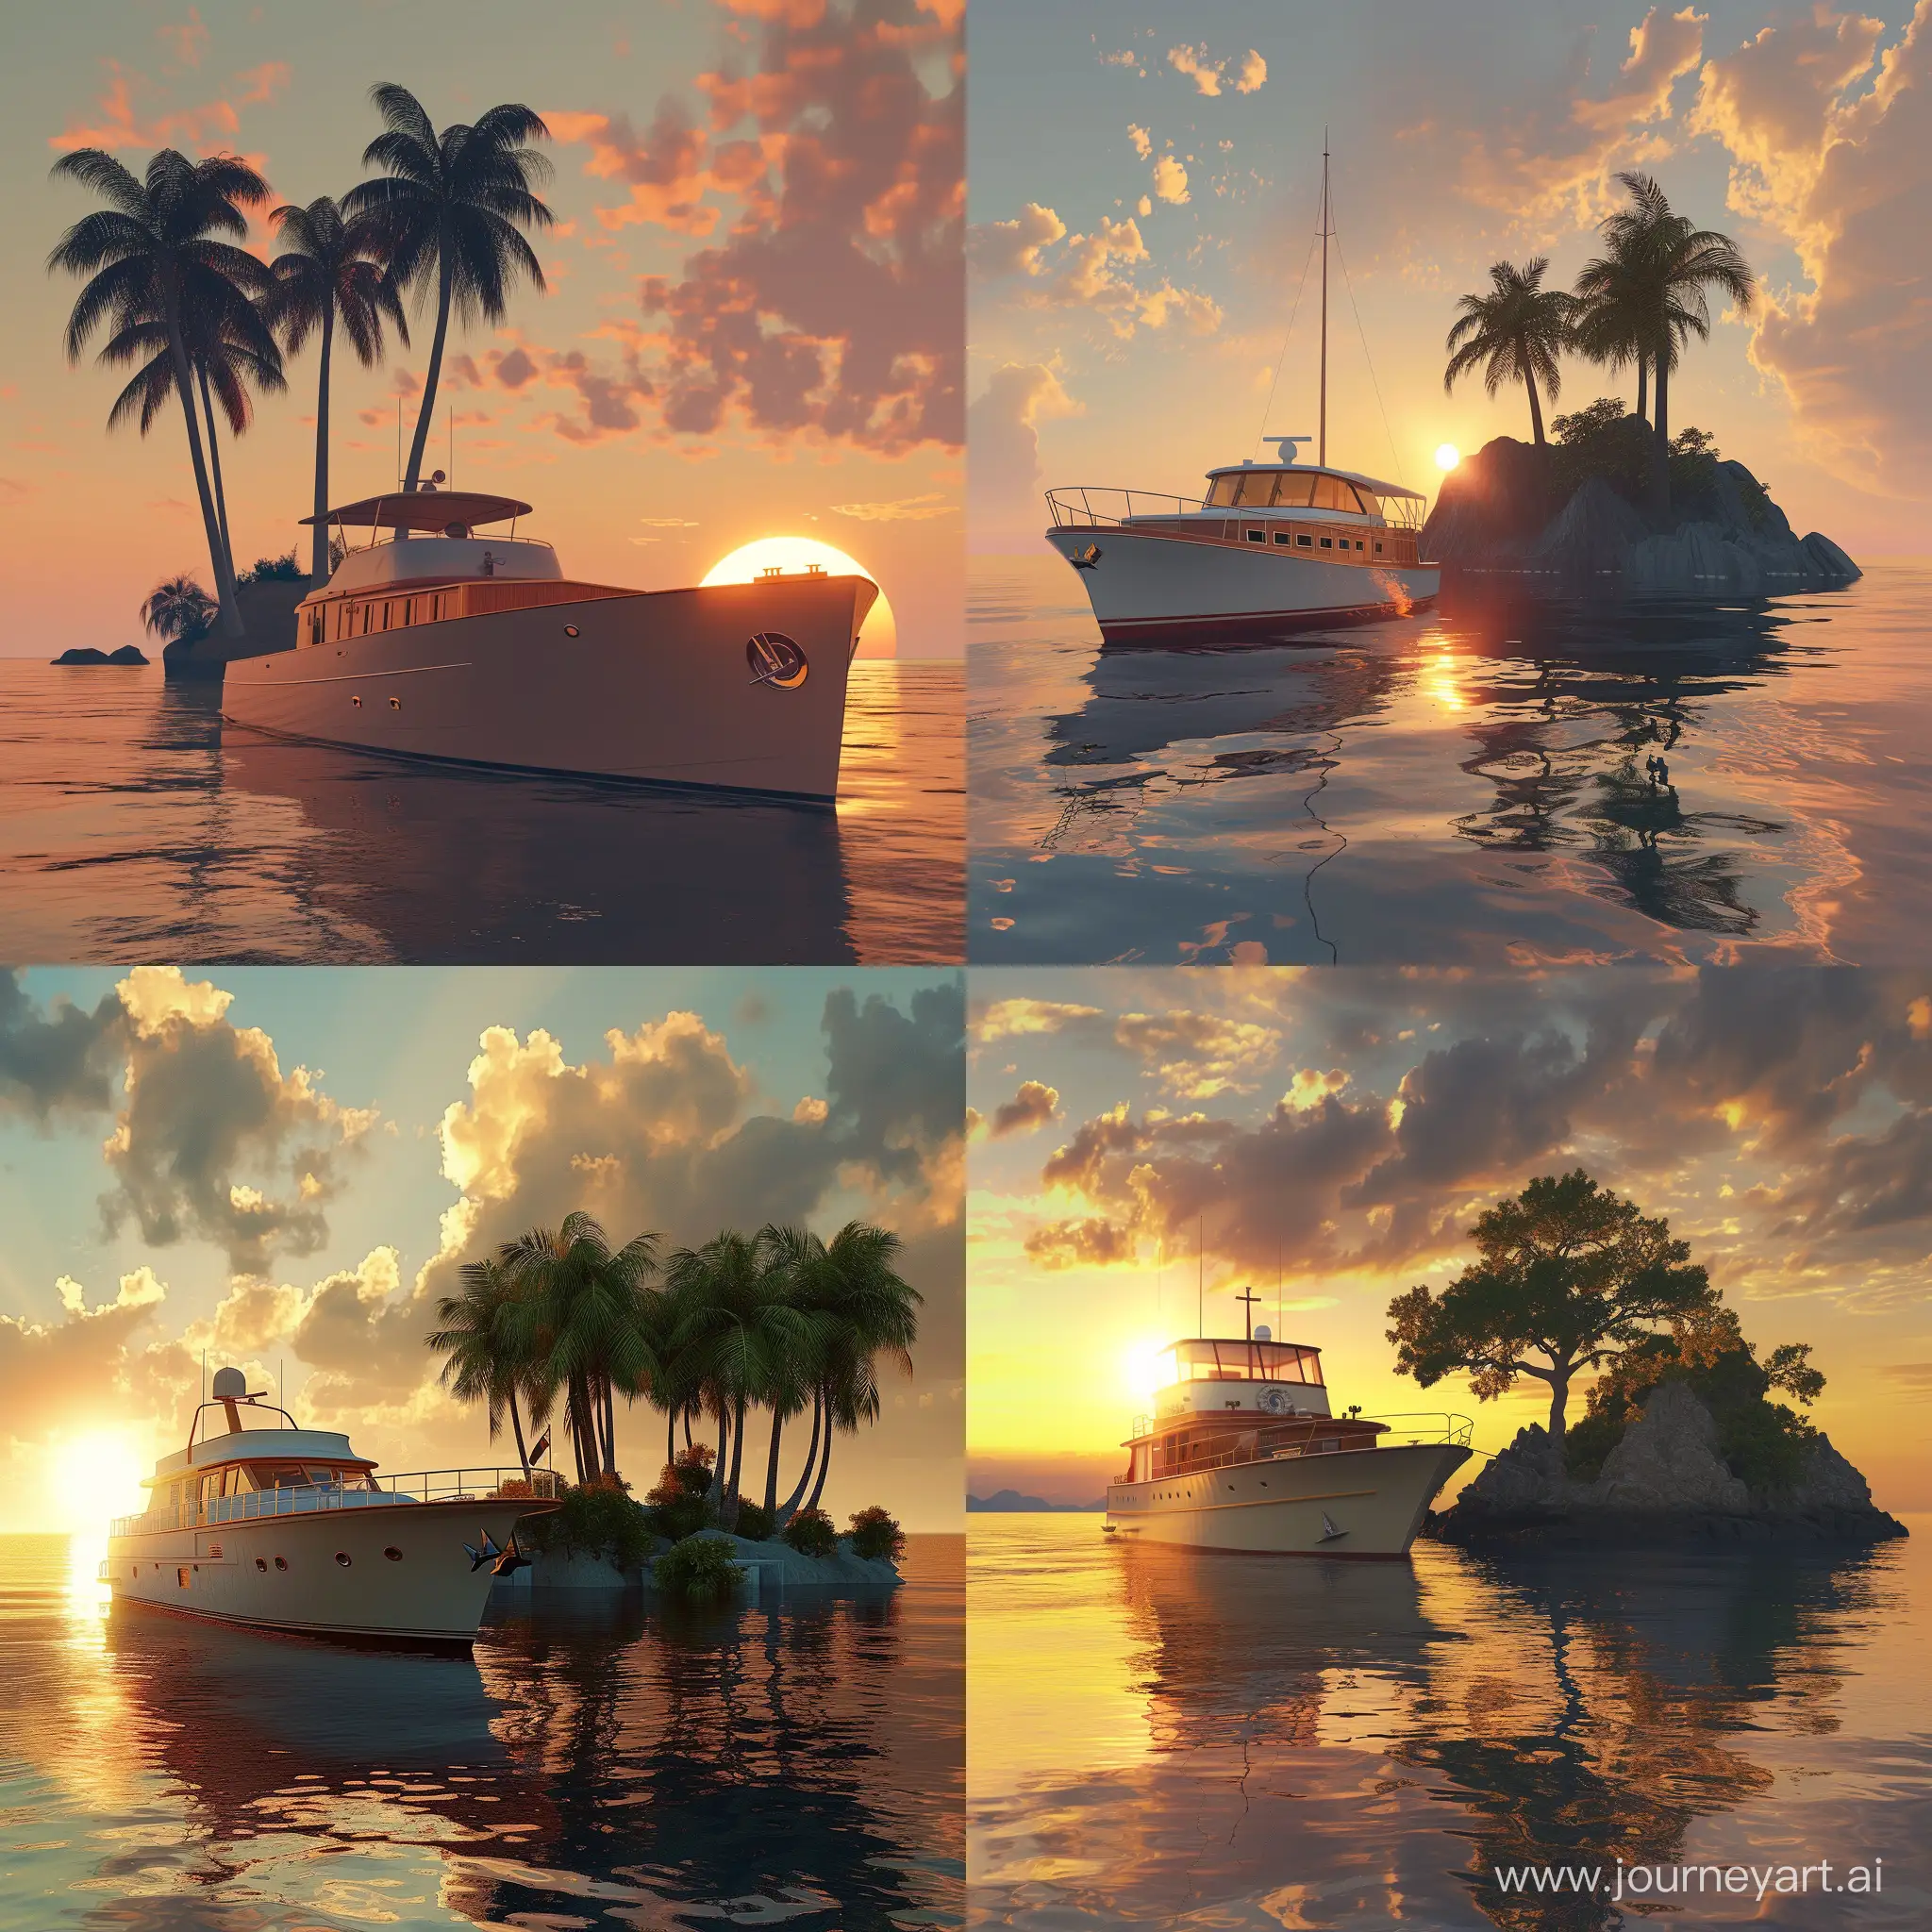 Ultra realistic 1950s yacht by an island with a sunset